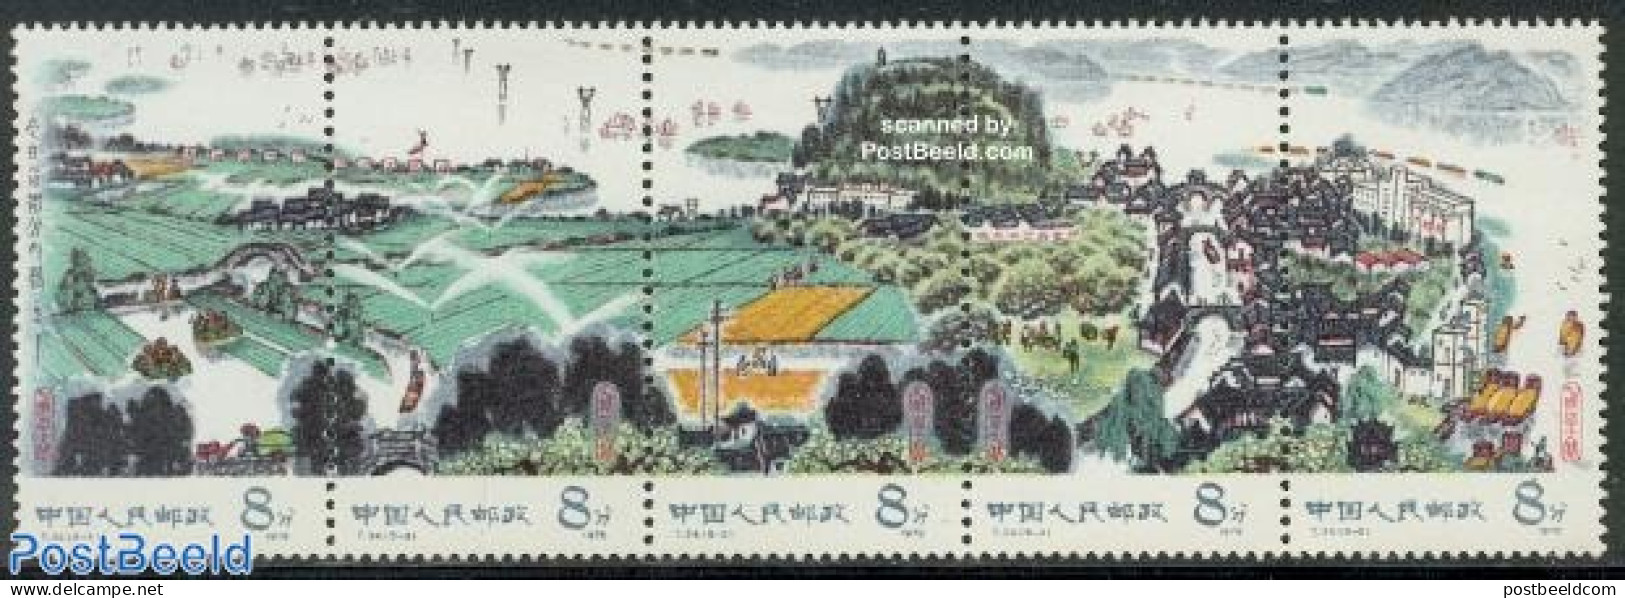 China People’s Republic 1978 Landscape 5v [::::], Mint NH - Unused Stamps